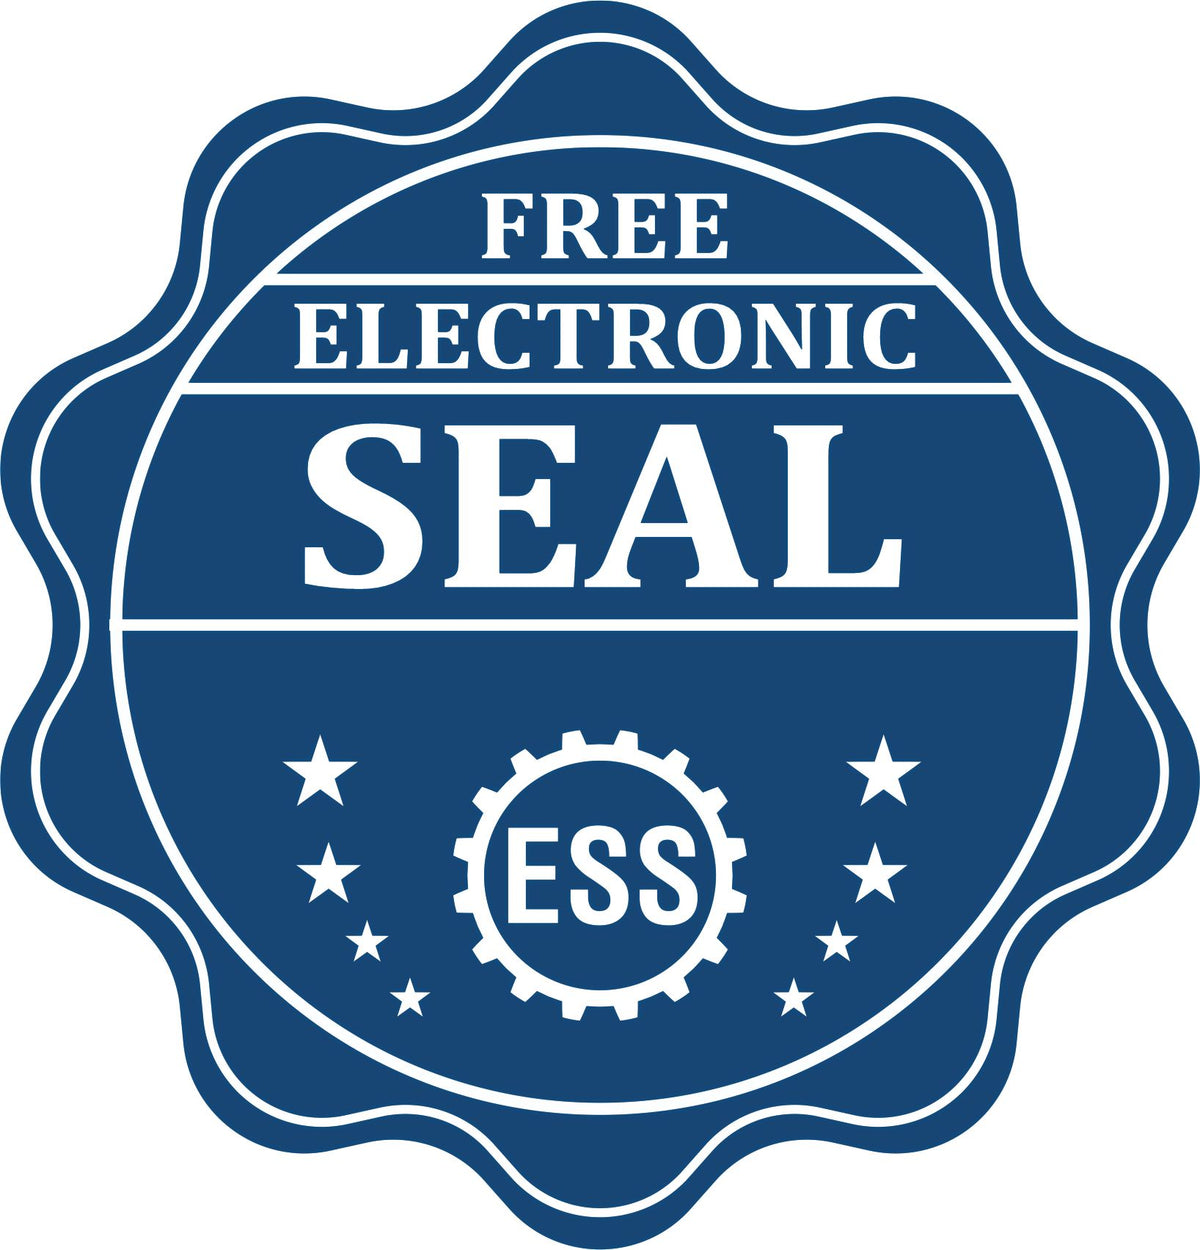 A badge showing a free electronic seal for the Gift Missouri Land Surveyor Seal with stars and the ESS gear on the emblem.